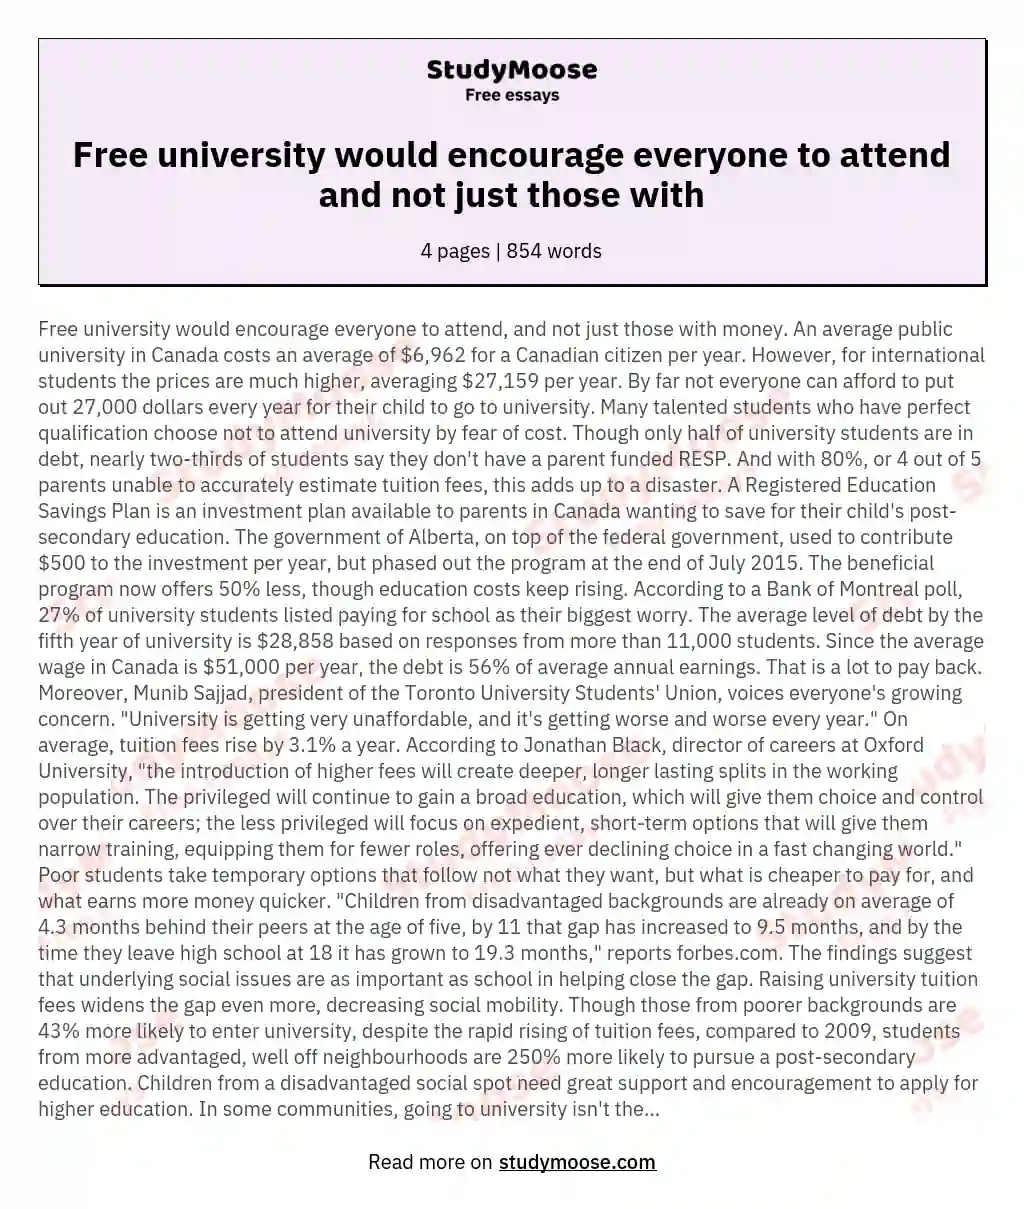 Free university would encourage everyone to attend and not just those with